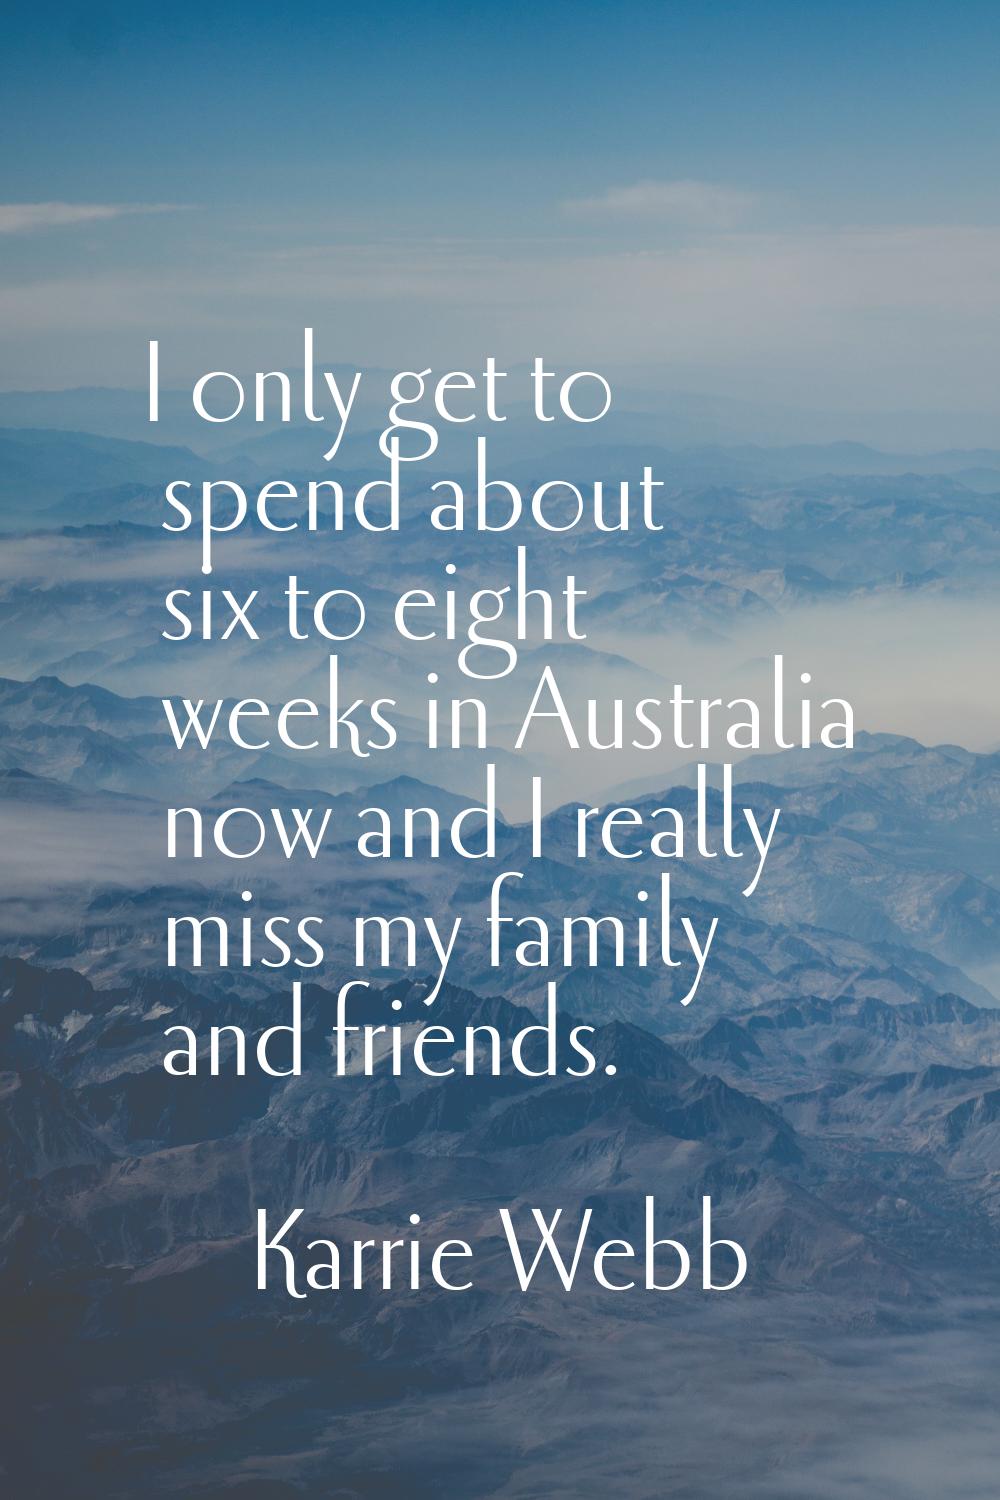 I only get to spend about six to eight weeks in Australia now and I really miss my family and frien